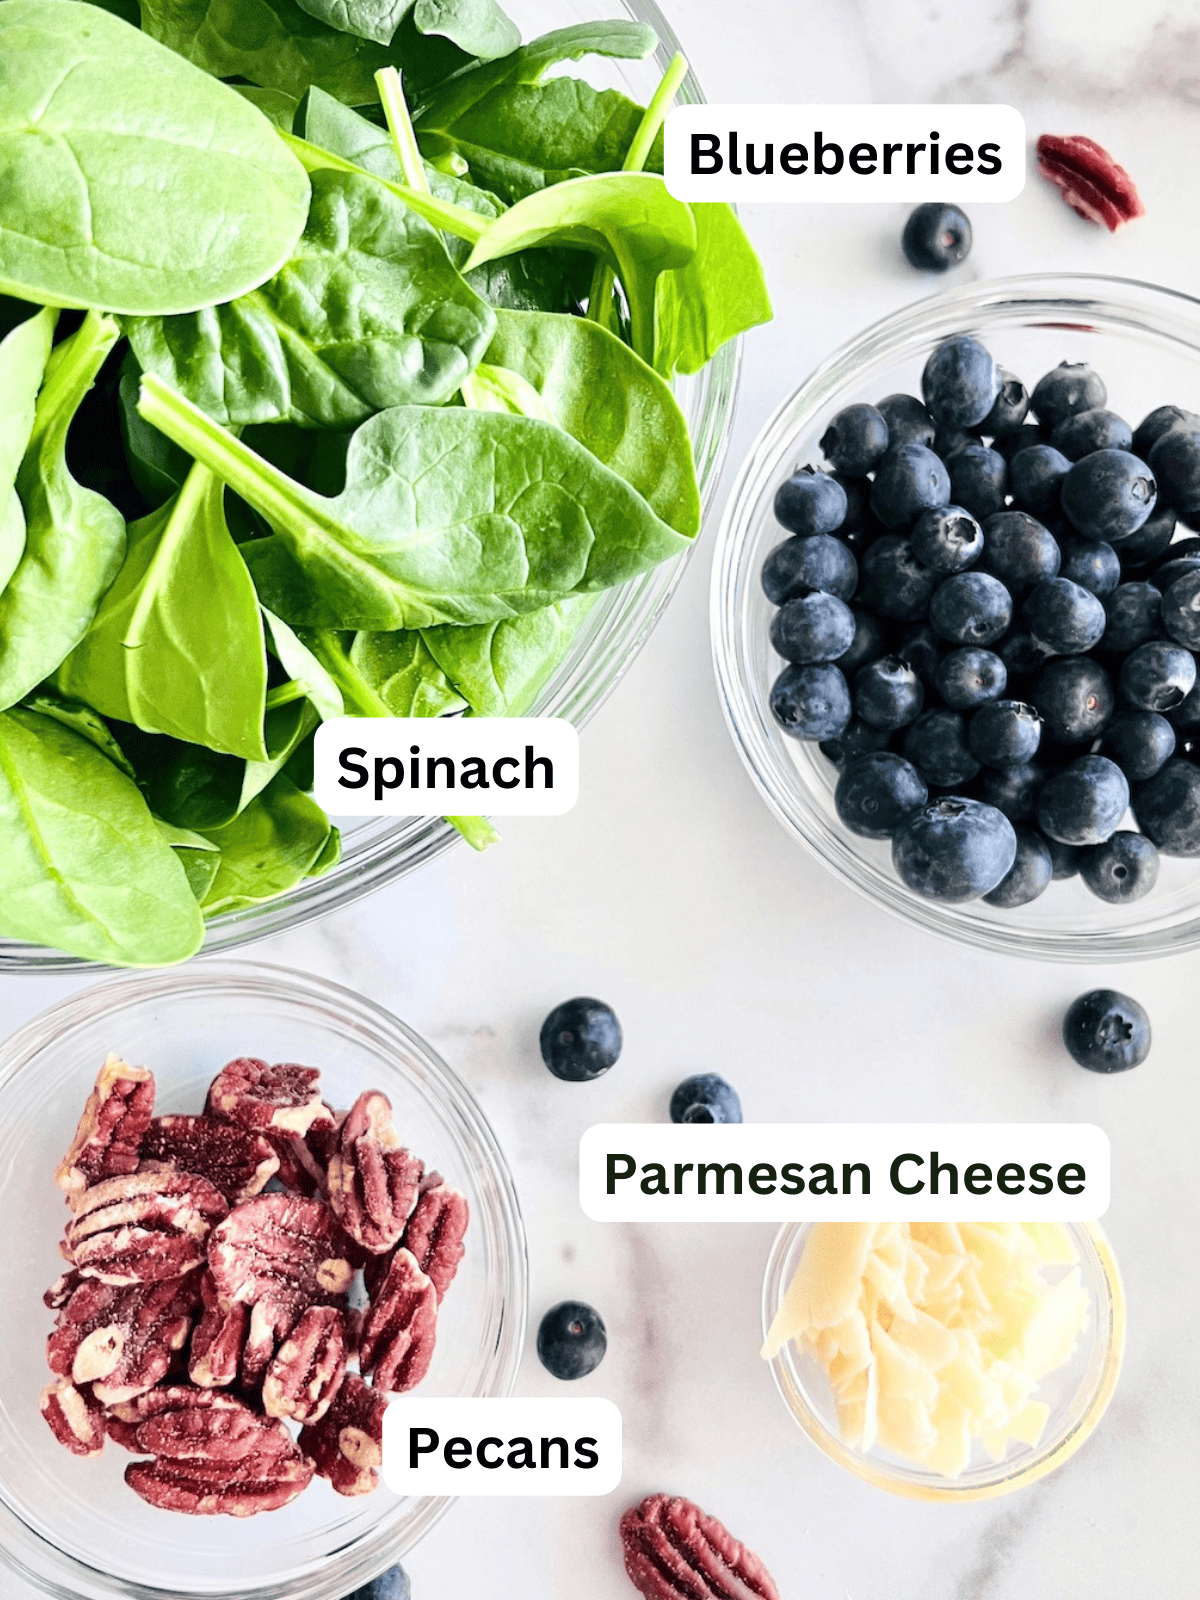 Labeled ingredients for spinach salad with blueberries, nuts, & cheese.